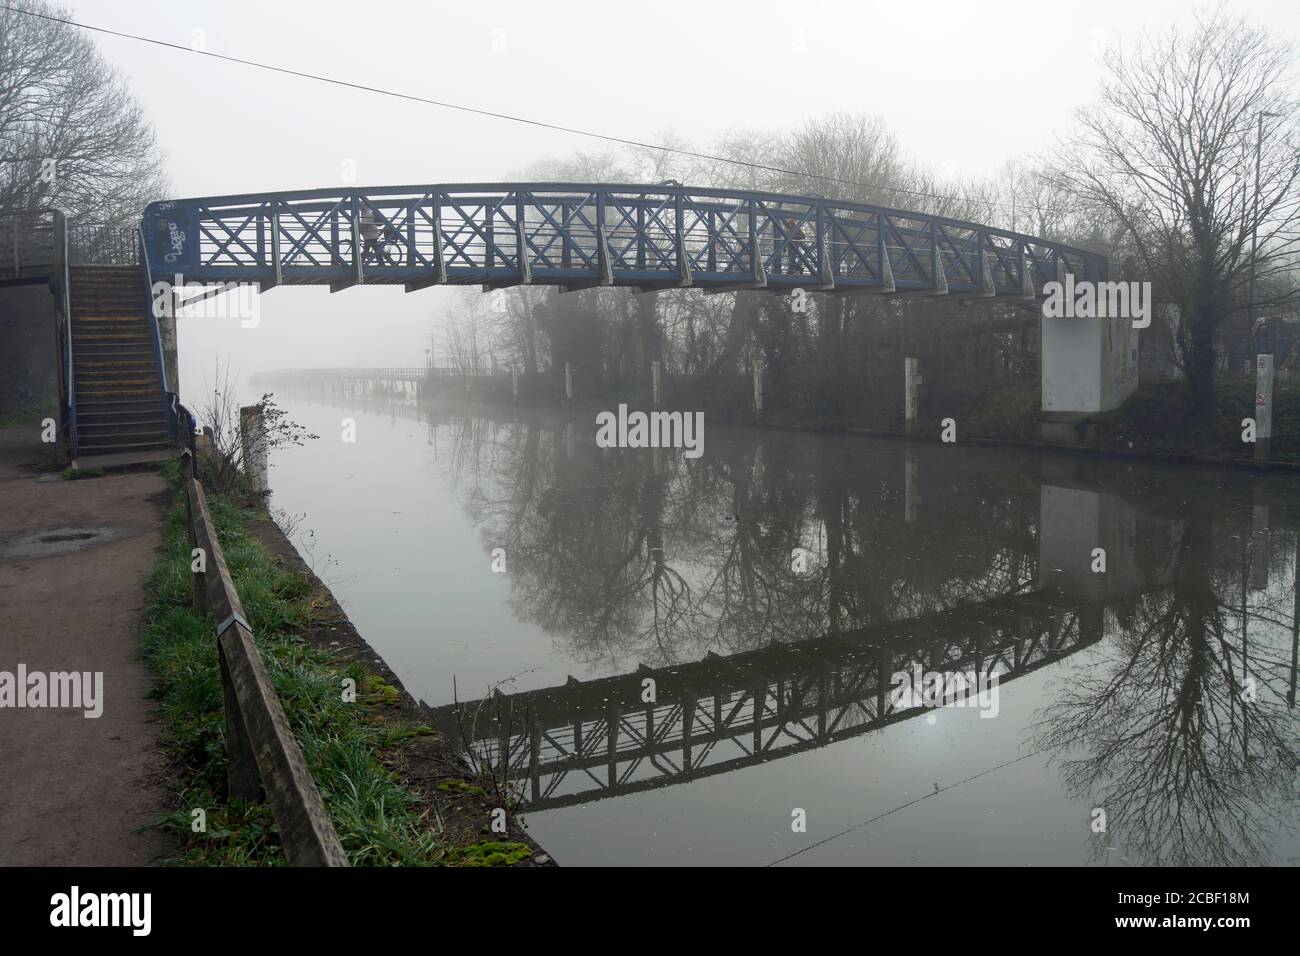 section of teddington footbridge, crossing the river thames between teddington and ham, seen on a foggy day in winter Stock Photo